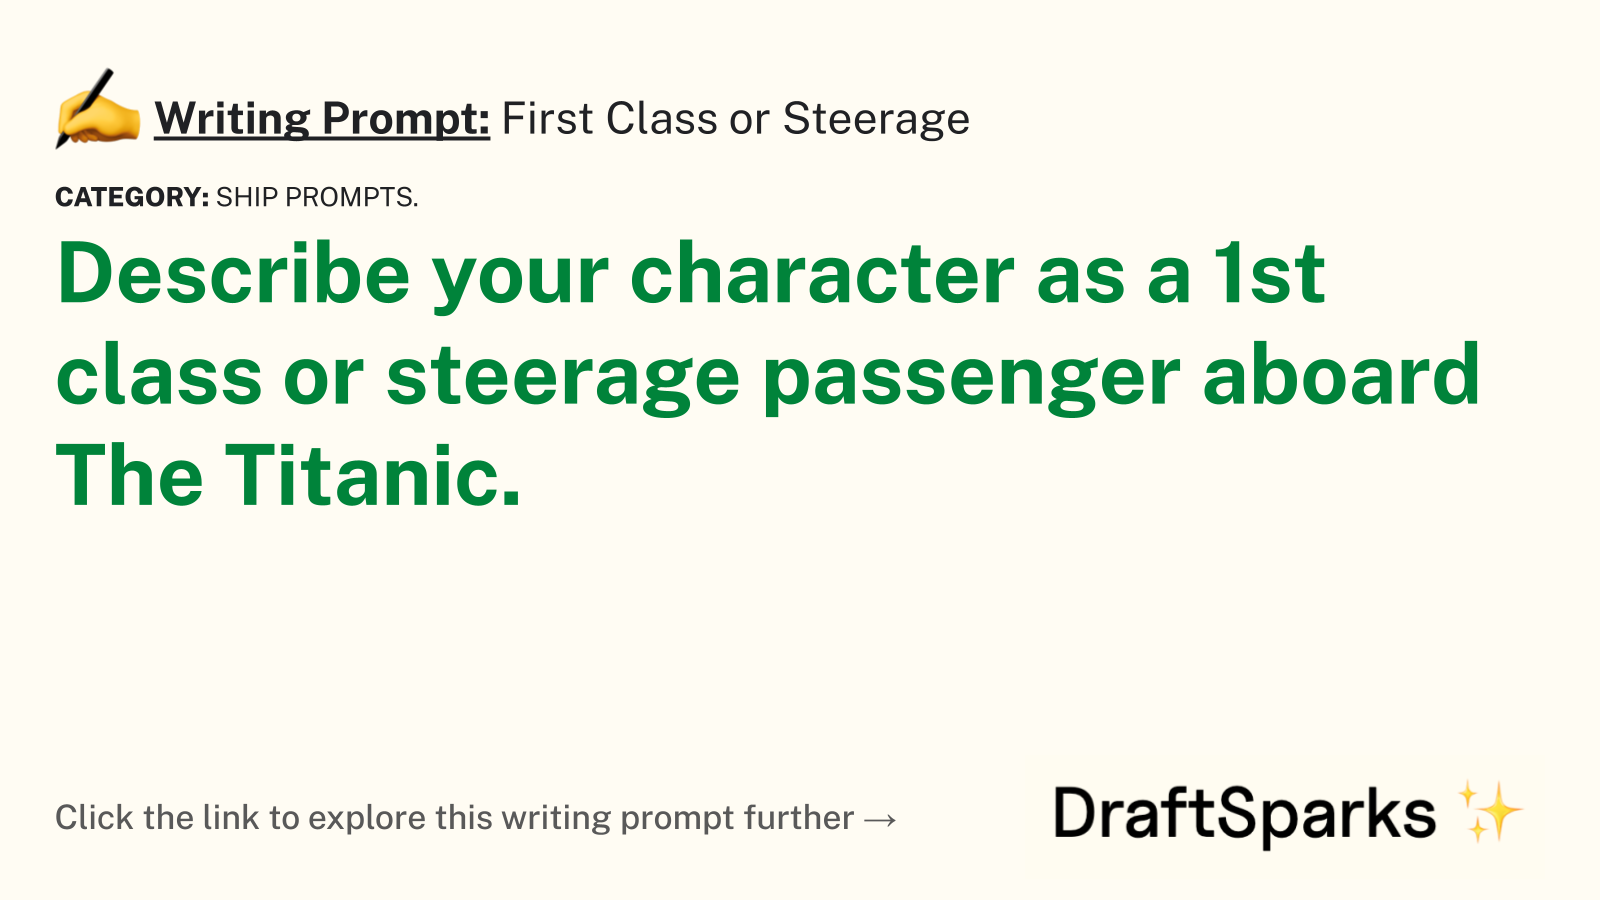 First Class or Steerage